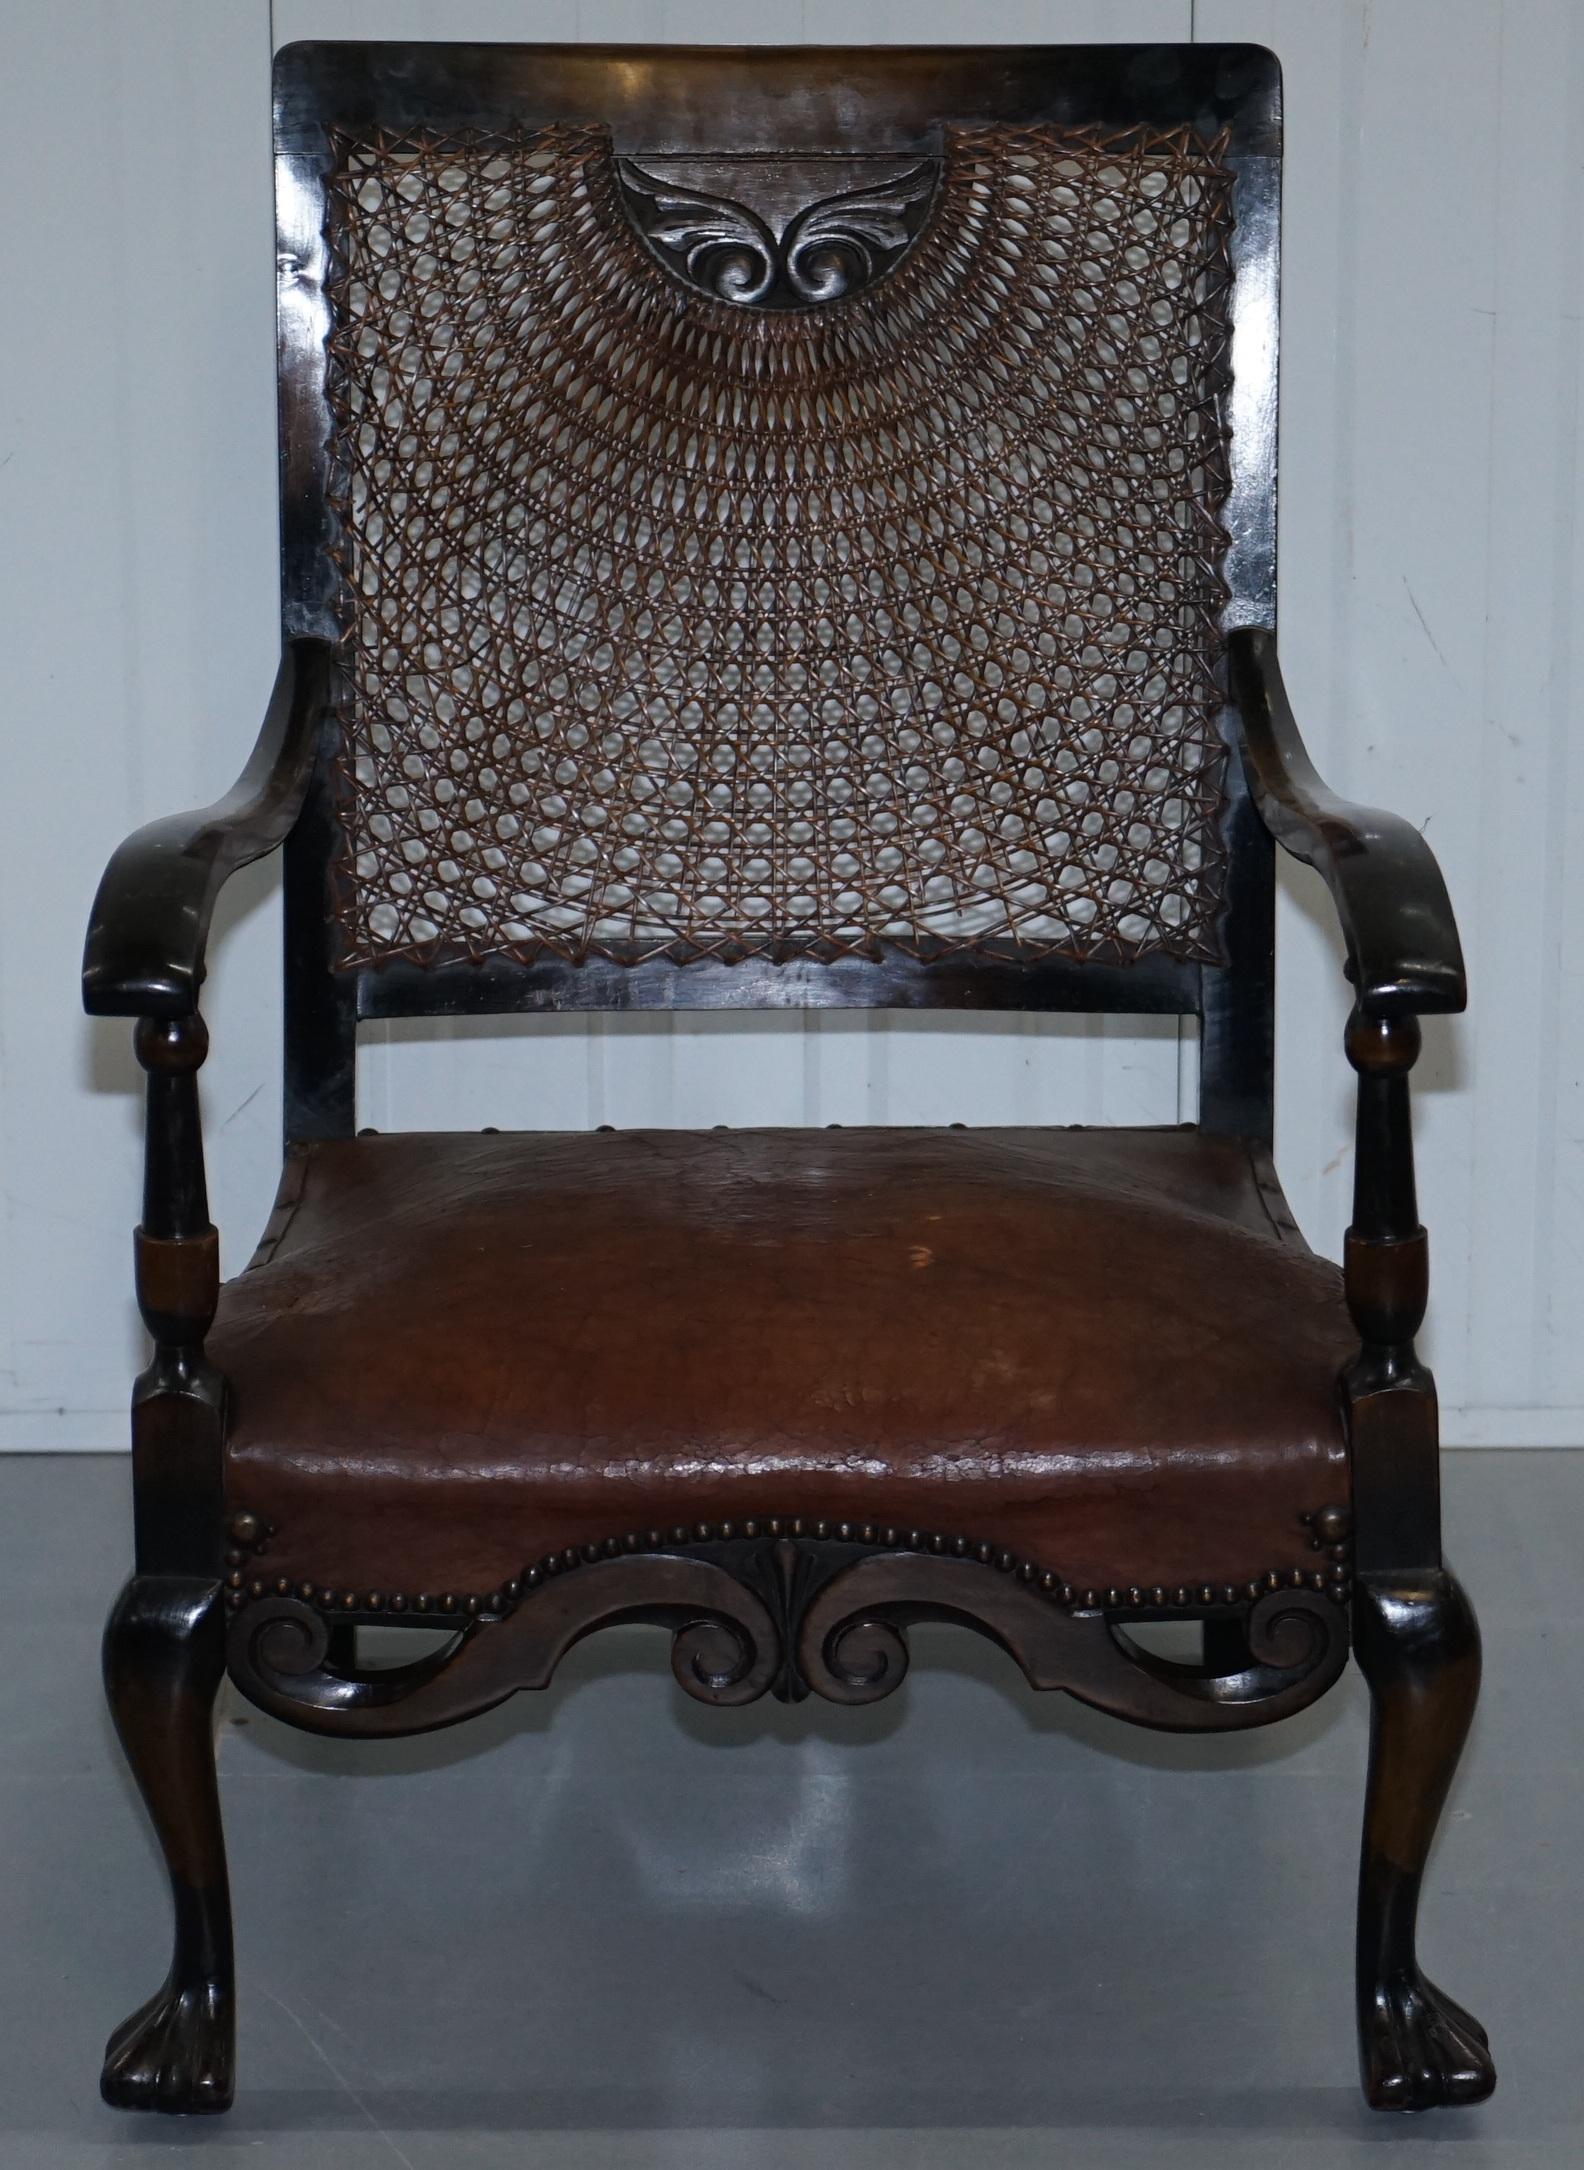 We are delighted to offer for sale is this circa 1910 original Spanish mahogany and brown leather open armchair

Please note the delivery fee listed is just a guide, it covers within the M25 only

A very comfortable rattan armchair, everything